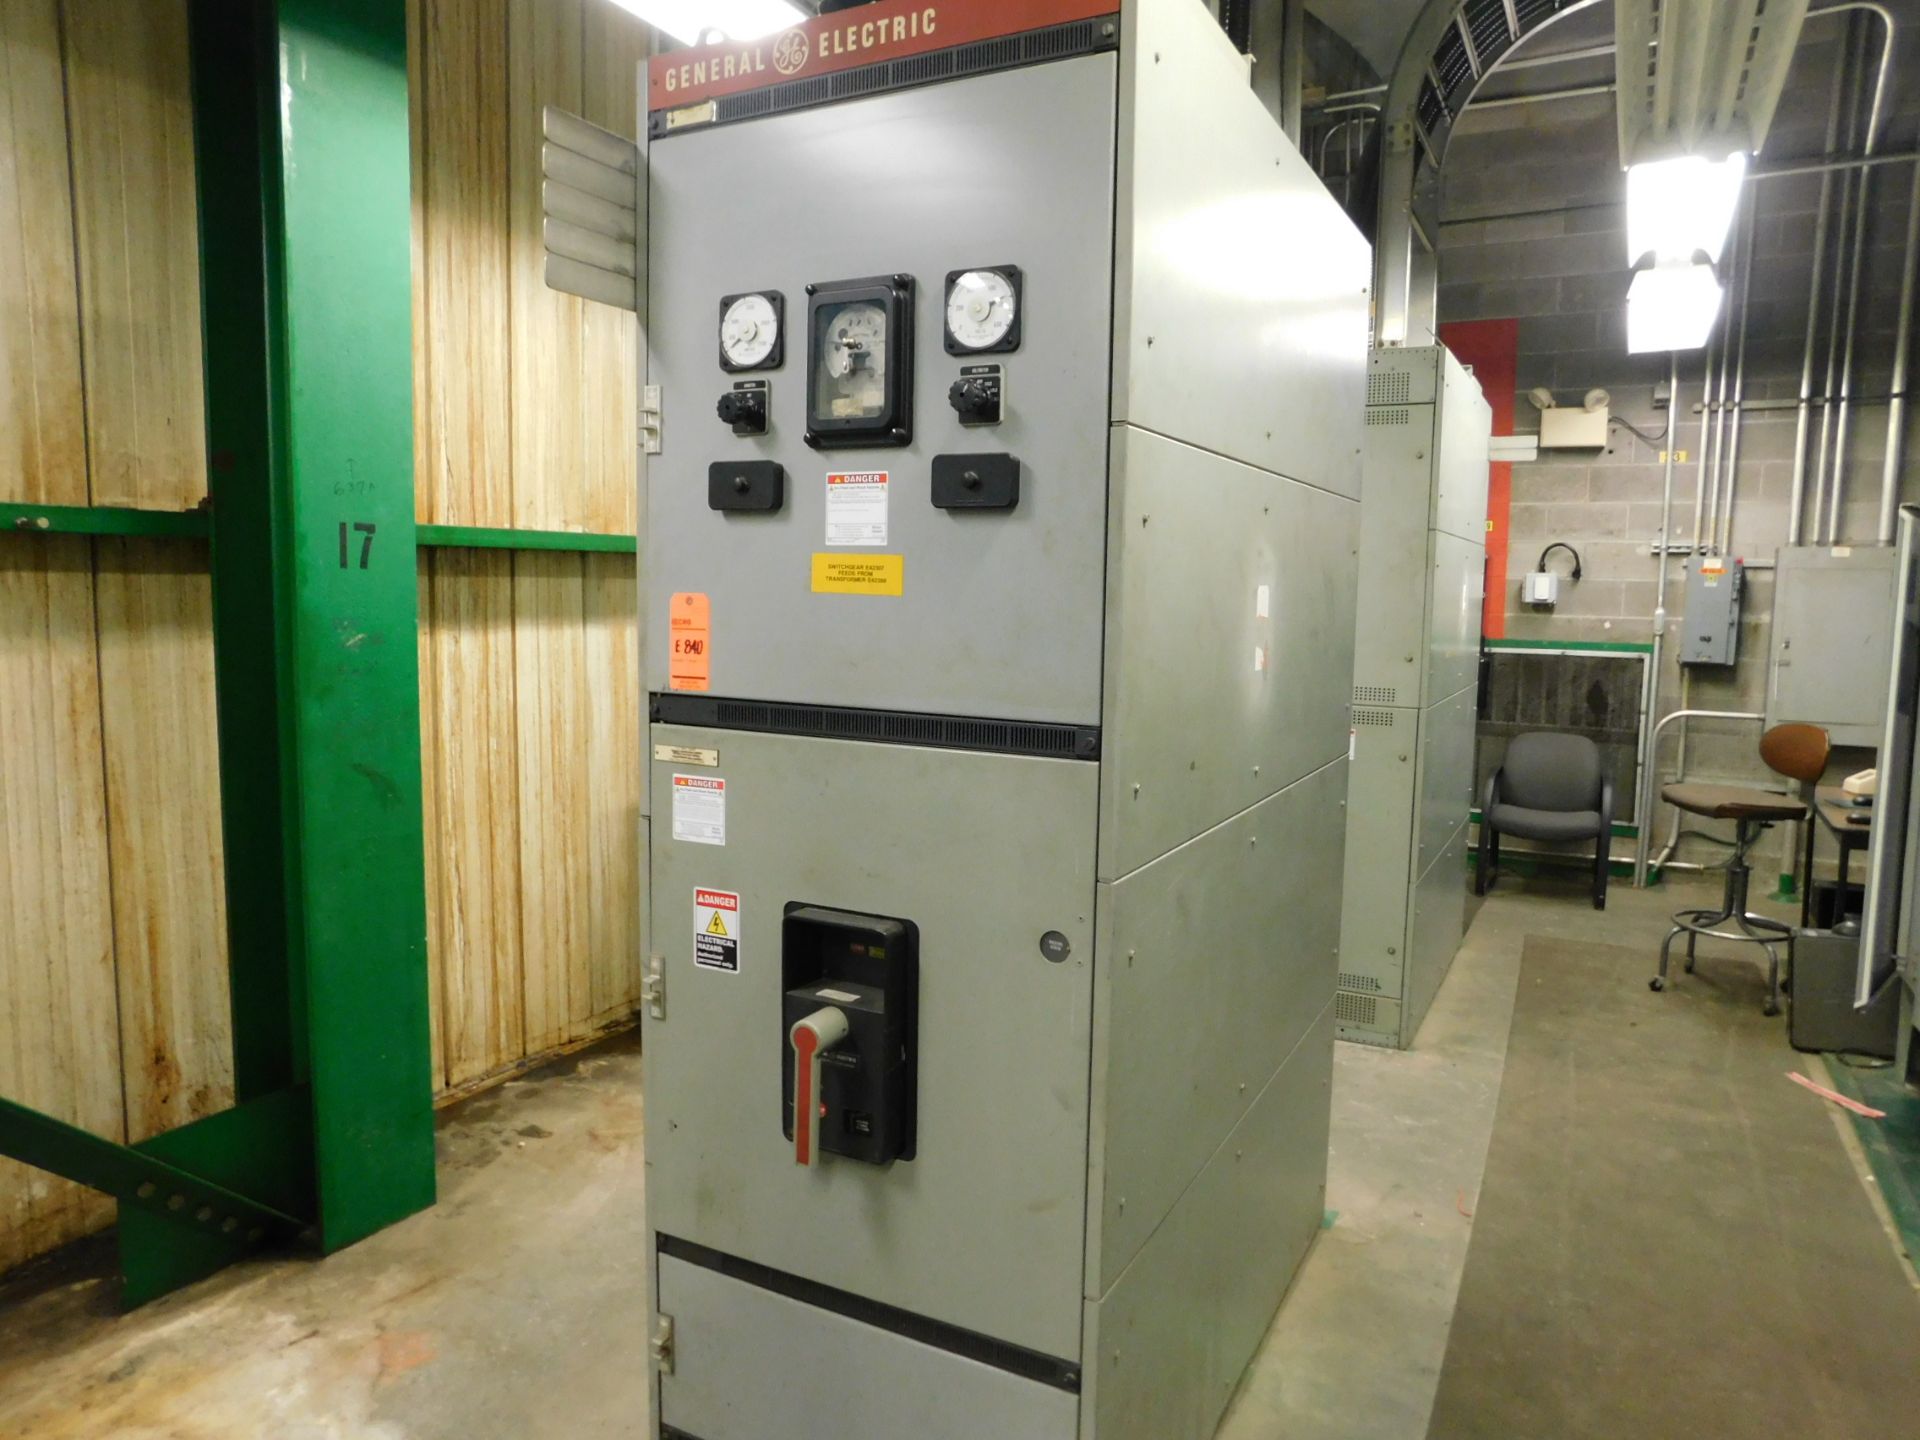 General Electric switch gear with amp and volt panel, low voltage power, shut off main power